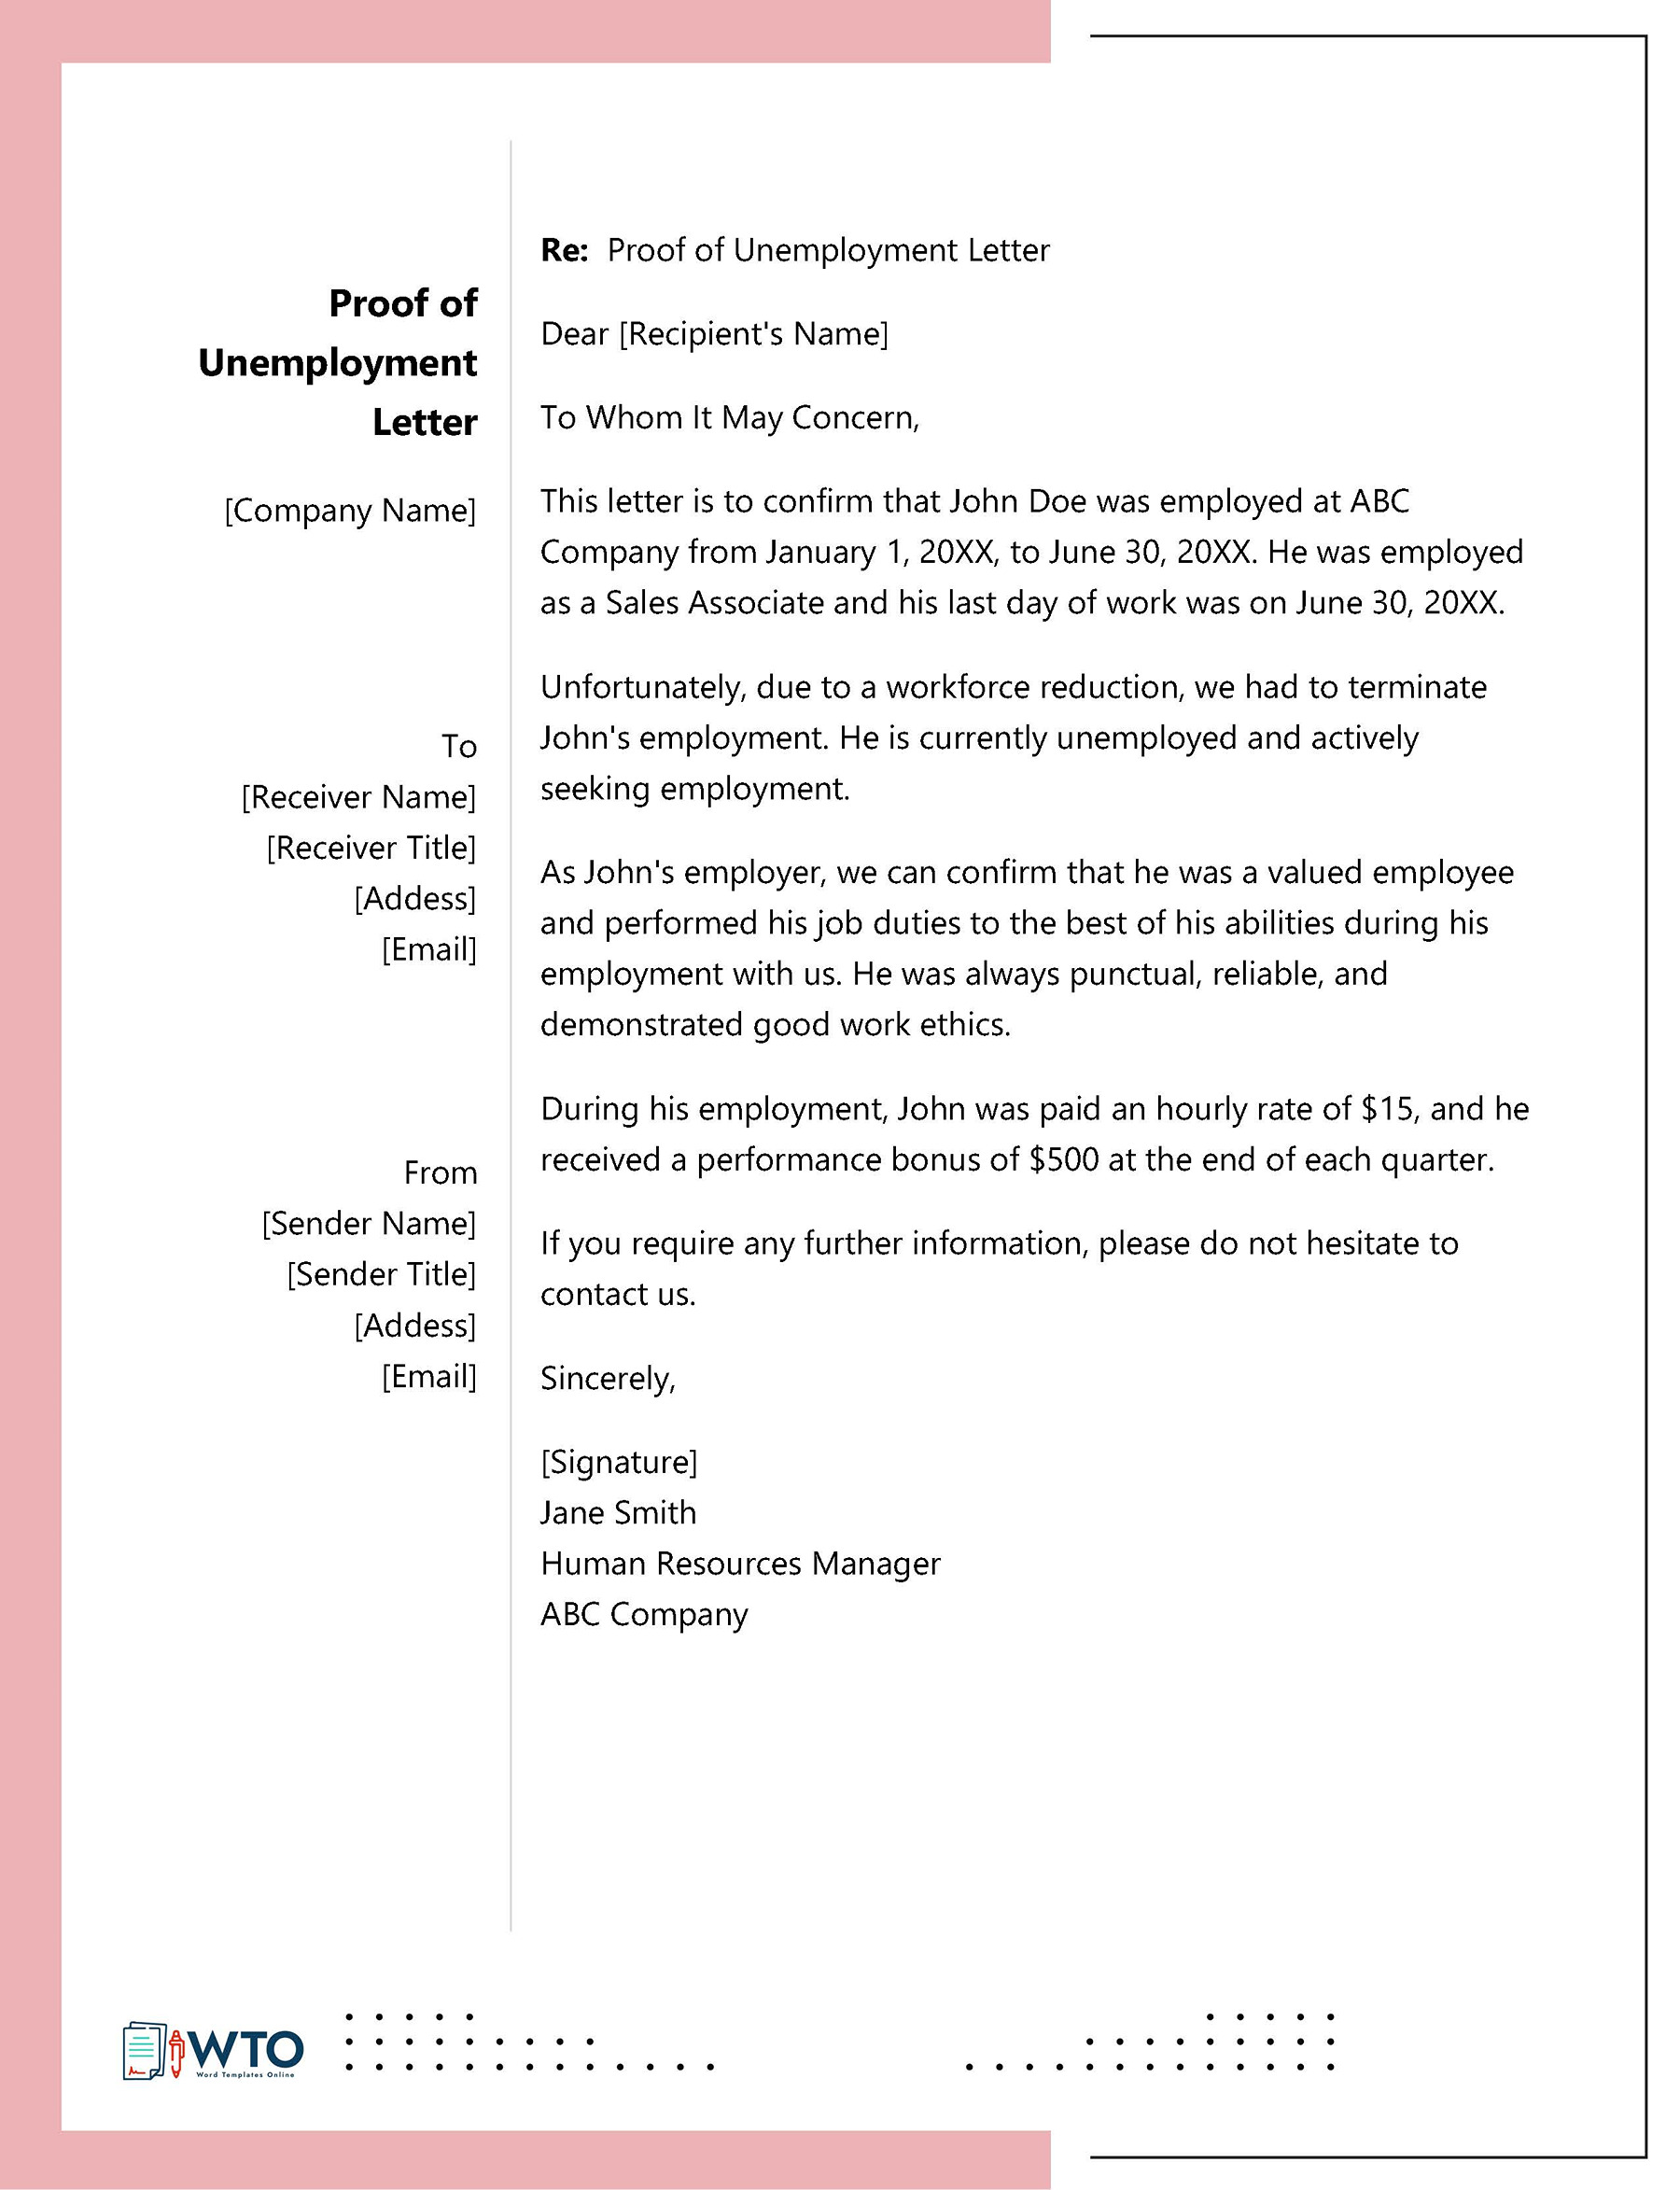 Proof of Unemployment Letter Example - Sample Document